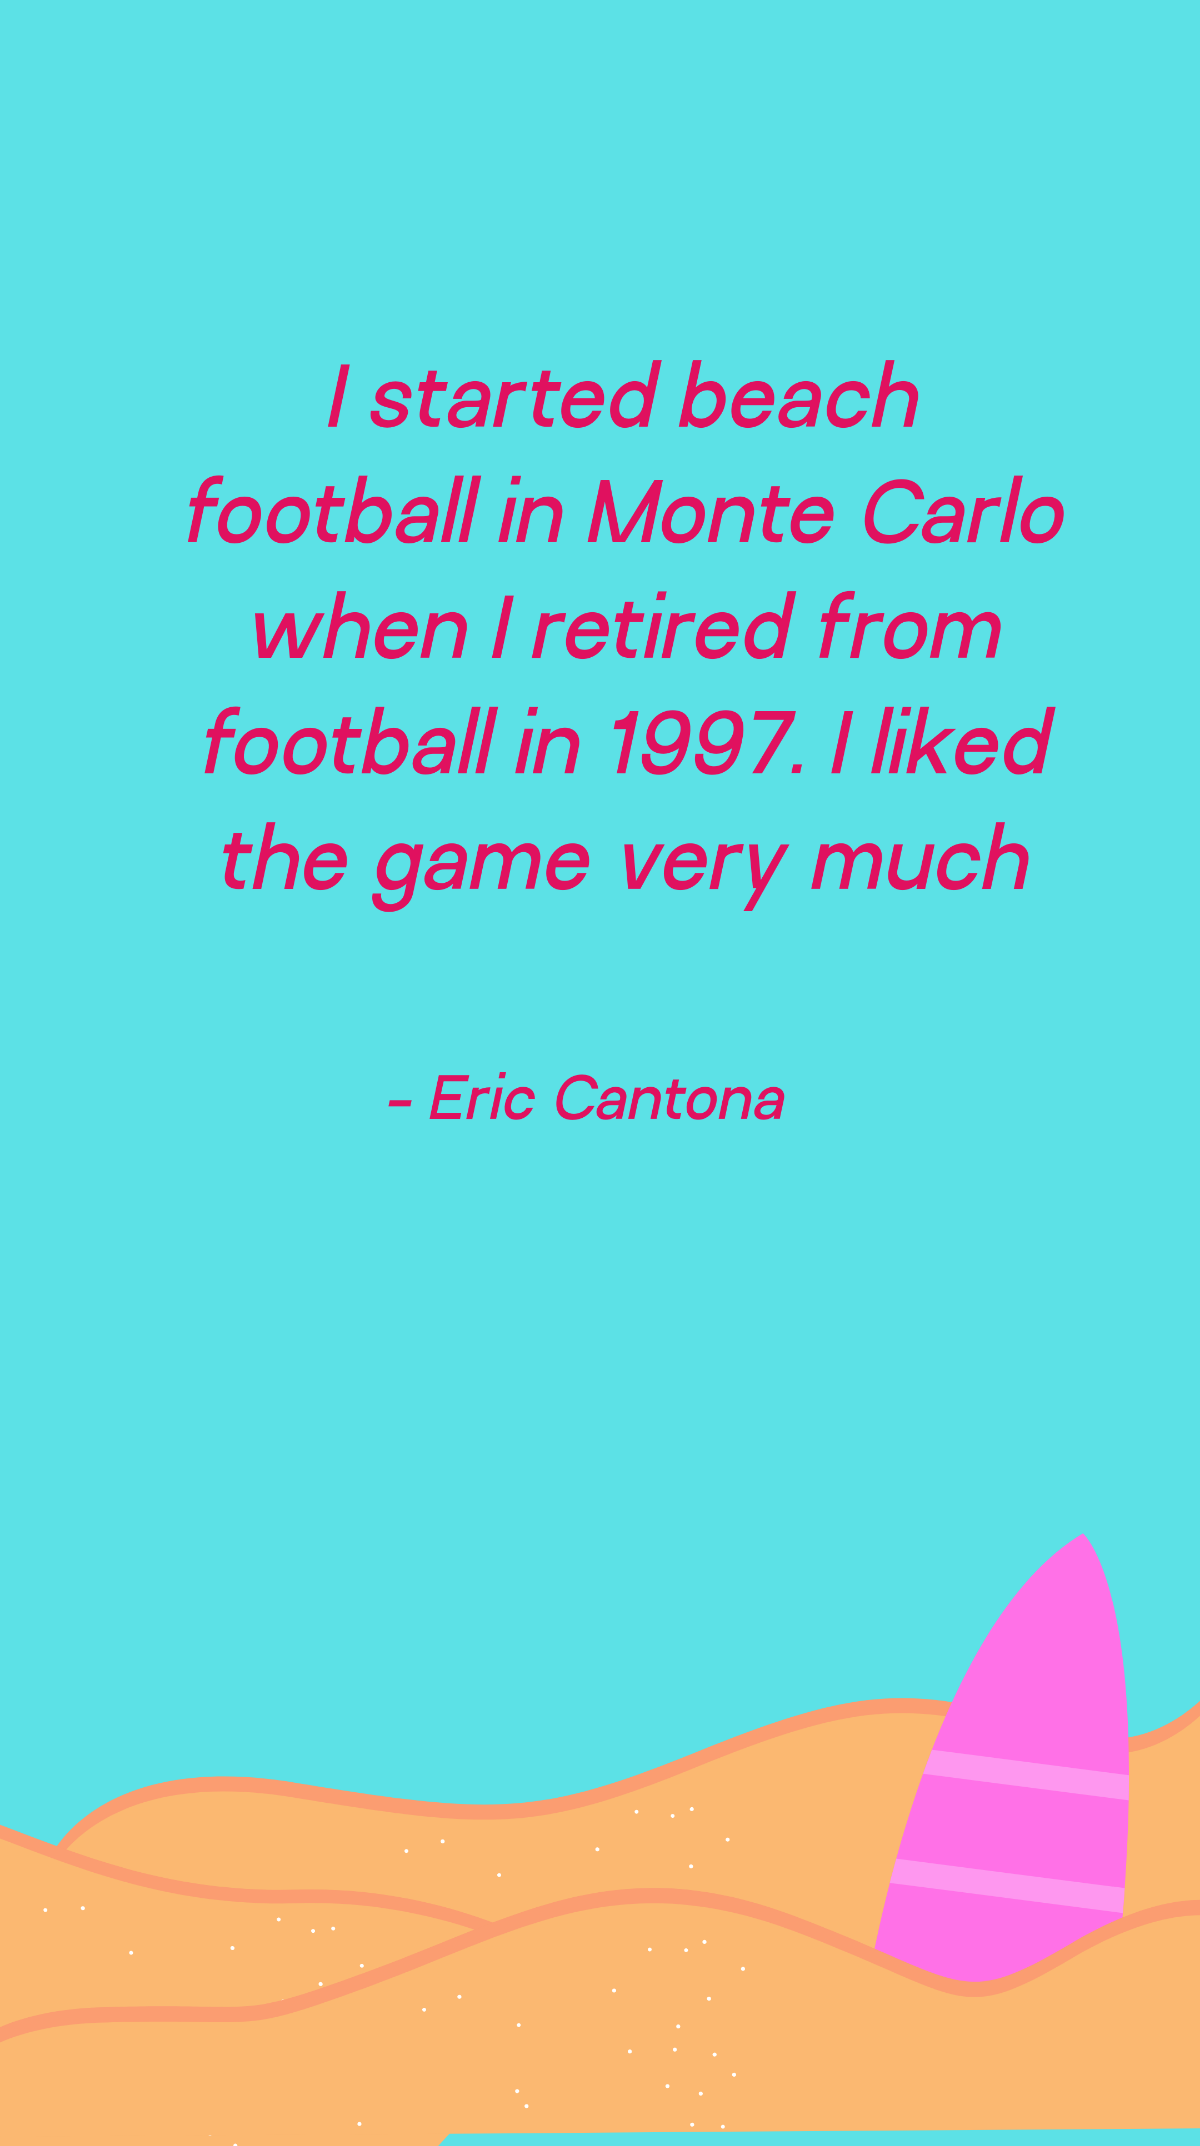 Eric Cantona - I started beach football in Monte Carlo when I retired from football in 1997. I liked the game very much